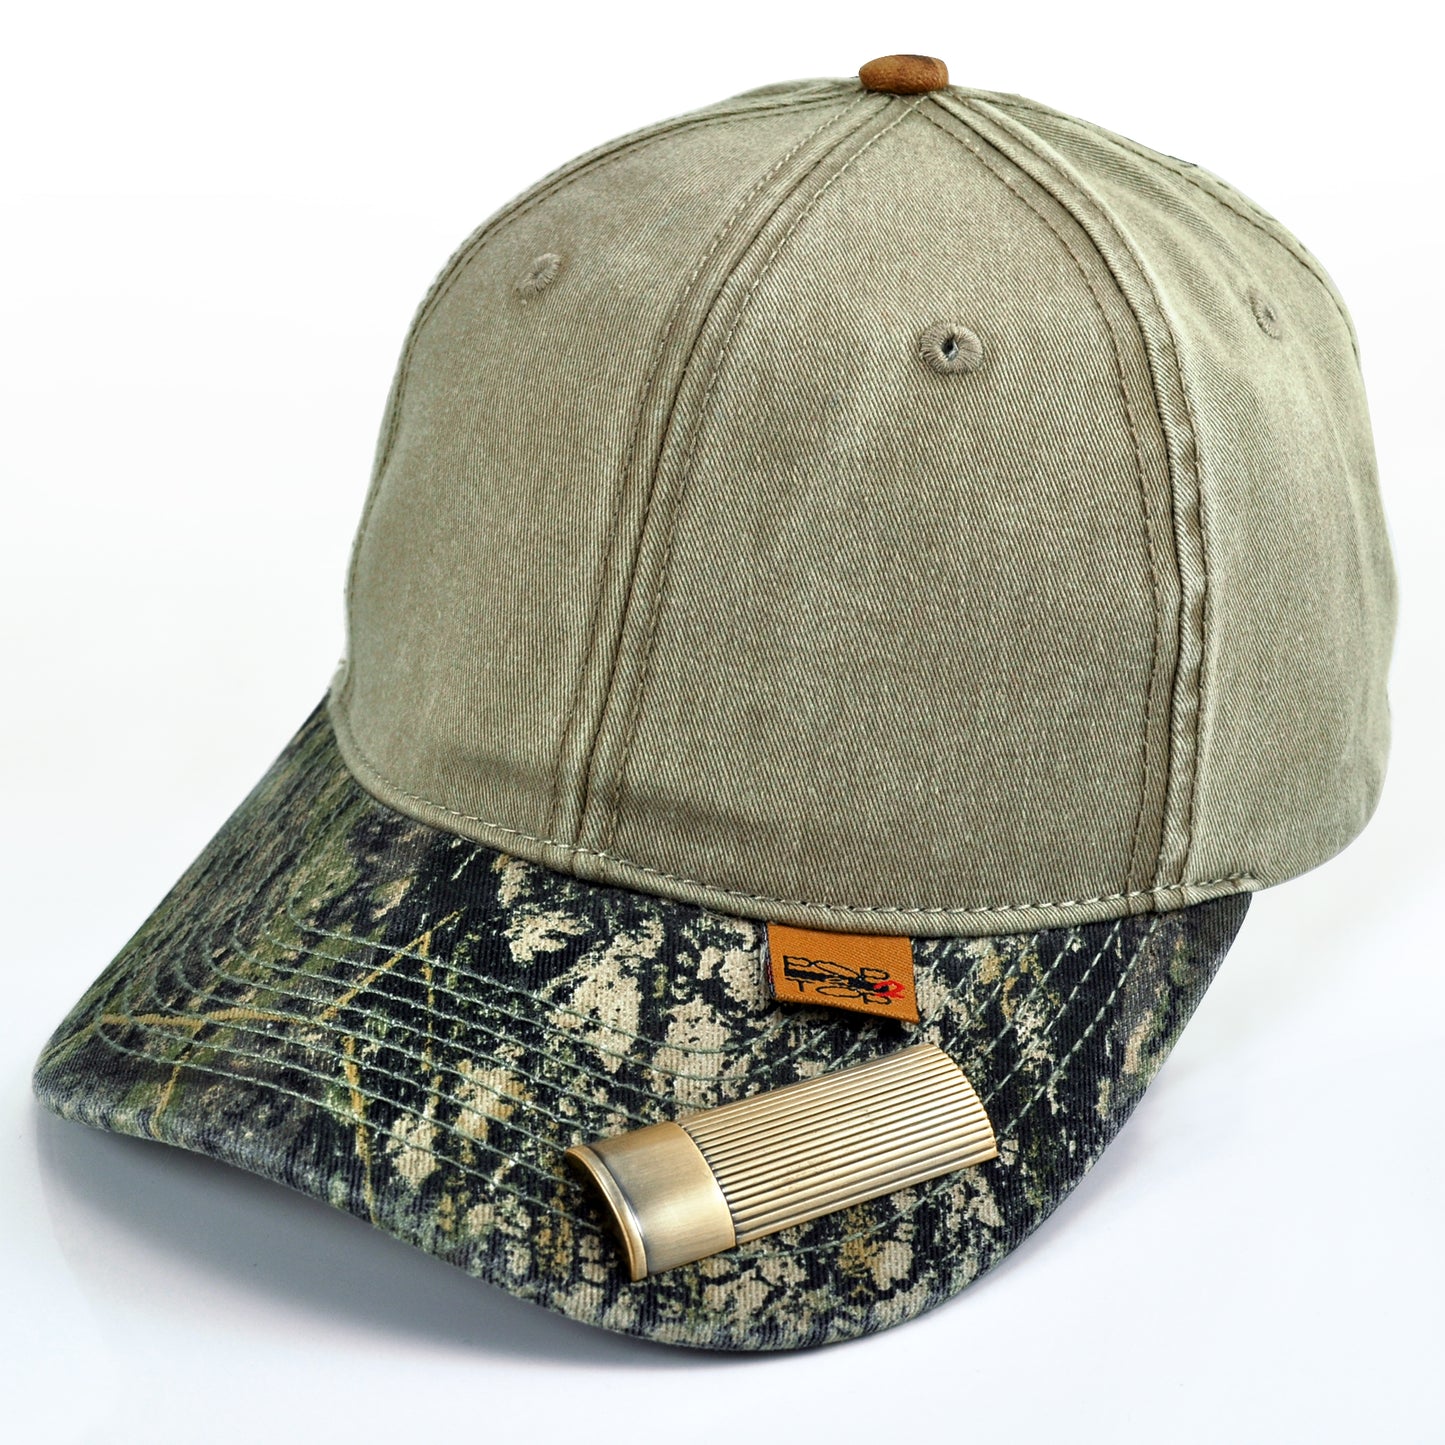 POP-A-TOP Snapback Hat with Bottle Opener Gray Camo